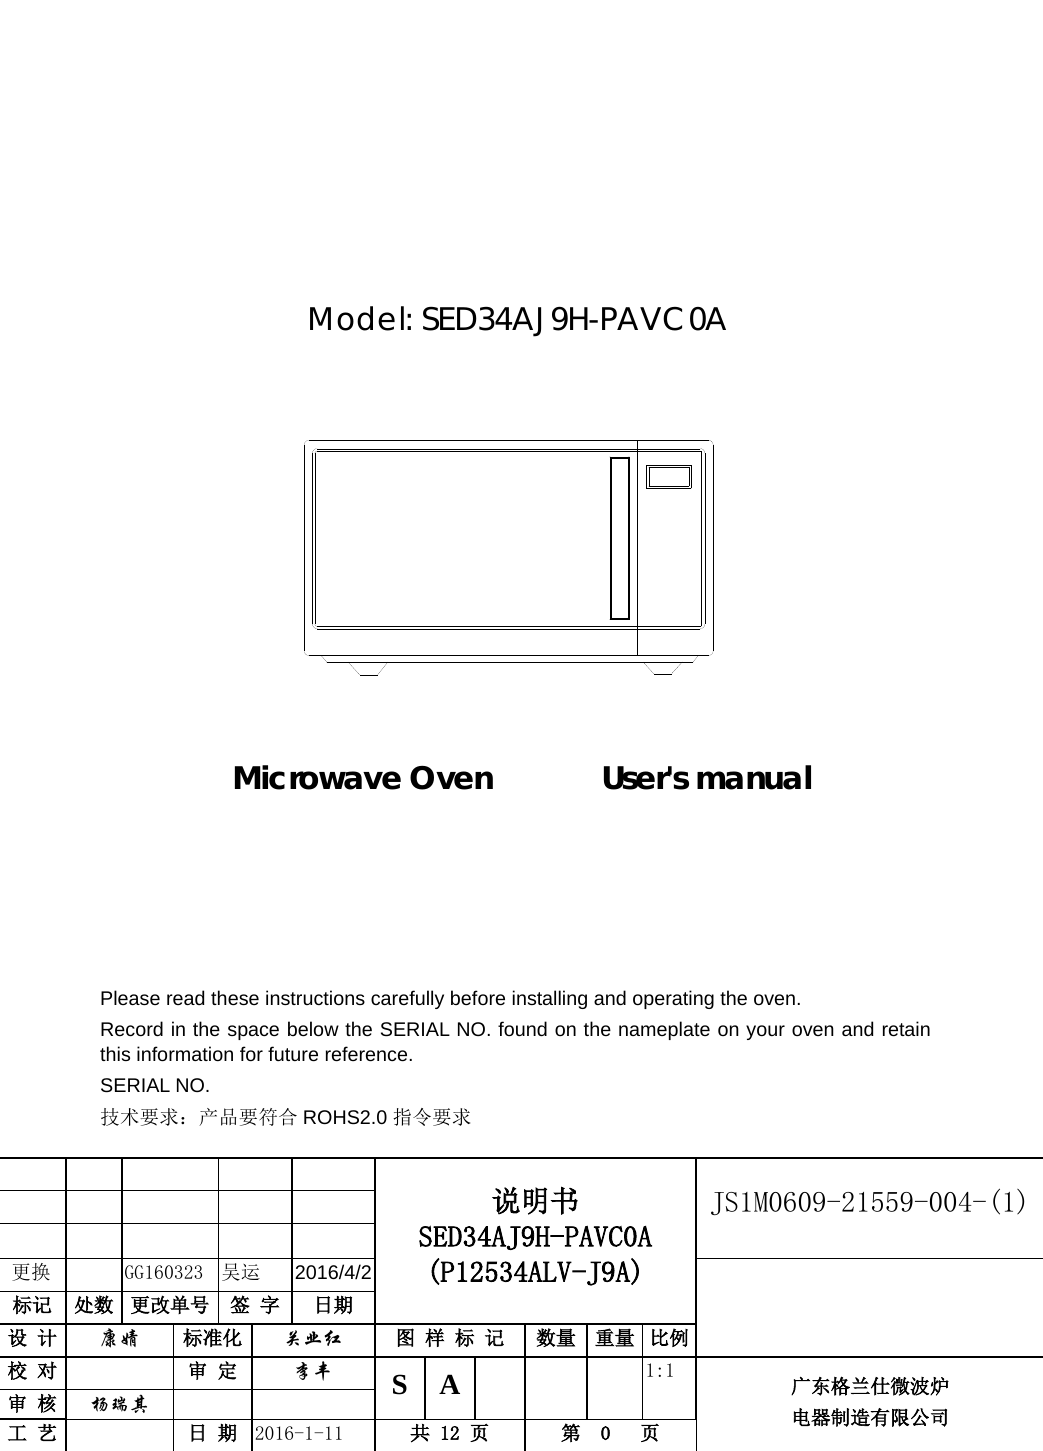                      Microwave Oven       User&apos;s manual                    说明书 SED34AJ9H-PAVC0A (P12534ALV-J9A) JS1M0609-21559-004-(1)                    更换     GG160323  吴运 2016/4/2  标记 处数 更改单号 签 字 日期 设 计 康婧 标准化 关业红 图 样 标 记 数量 重量 比例 校 对  审 定 李丰 S  A        1:1 广东格兰仕微波炉 电器制造有限公司 审 核 杨瑞其   工 艺  日 期 2016-1-11 共 12 页 第  0   页         Model: SED34AJ9H-PAVC0A                           Please read these instructions carefully before installing and operating the oven. Record in the space below the SERIAL NO. found on the nameplate on your oven and retain this information for future reference. SERIAL NO. 技术要求：产品要符合 ROHS2.0 指令要求  